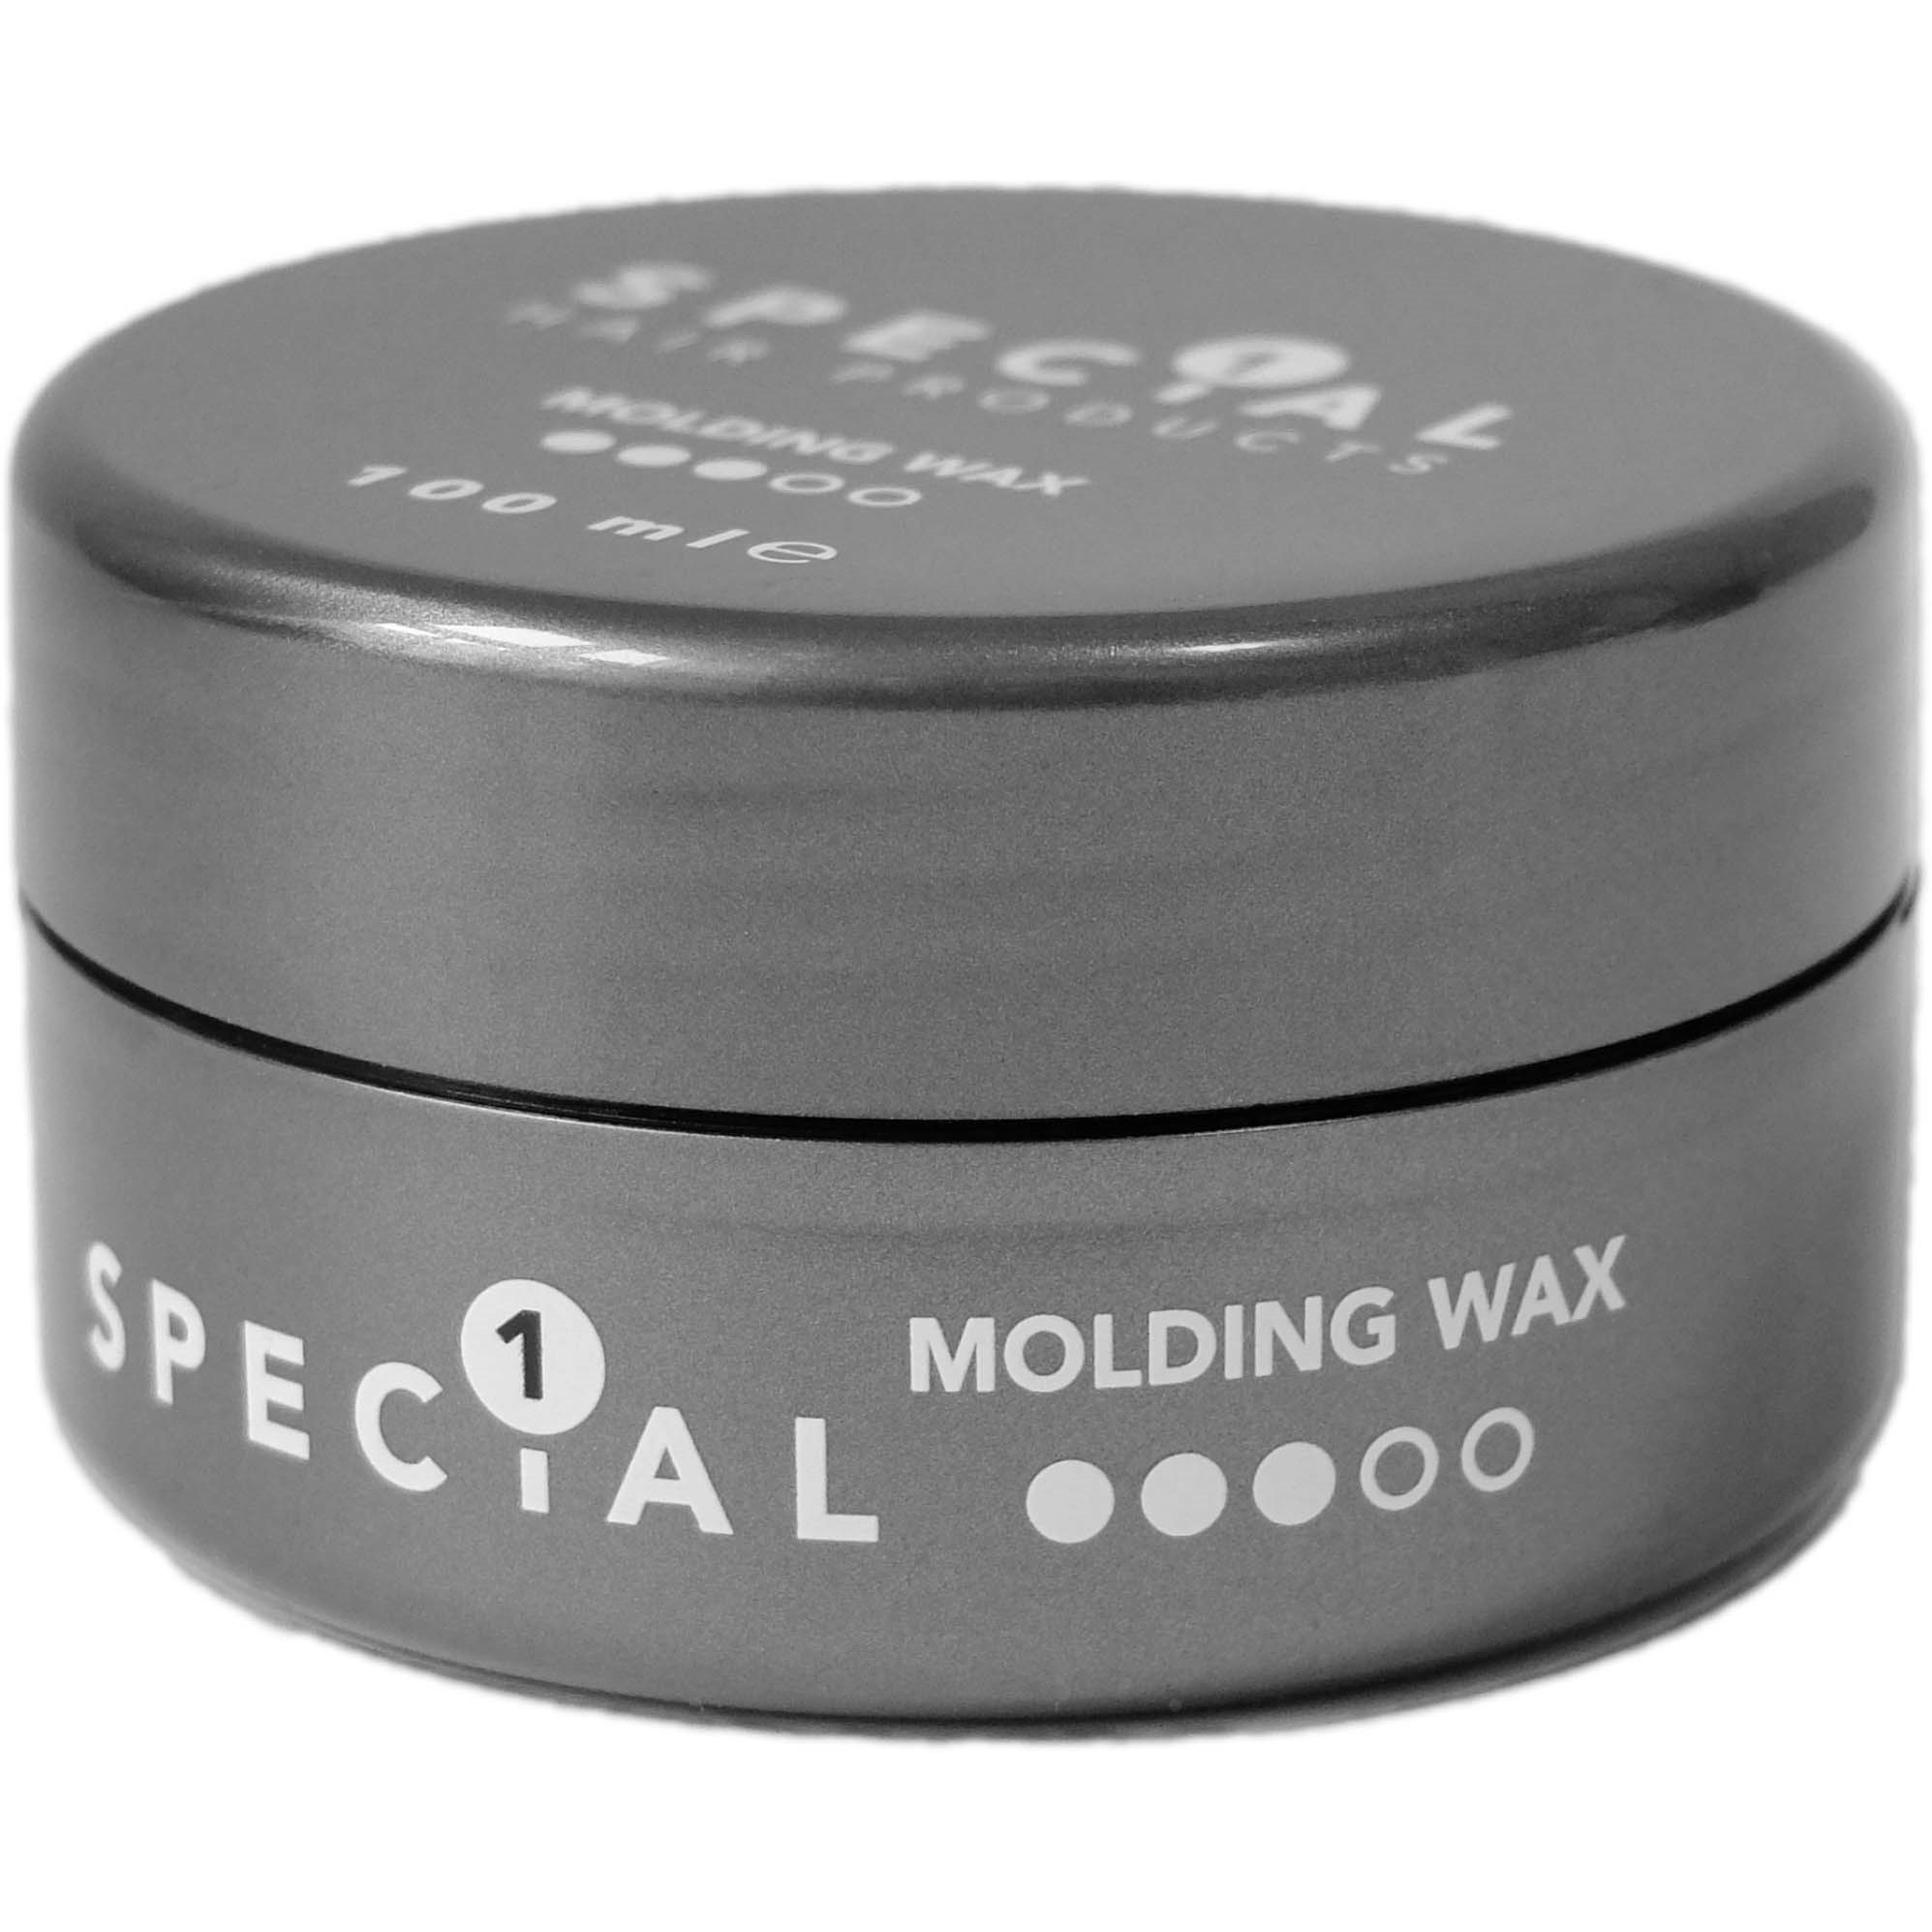 SPECIAL 1 Molding Wax 100 ml